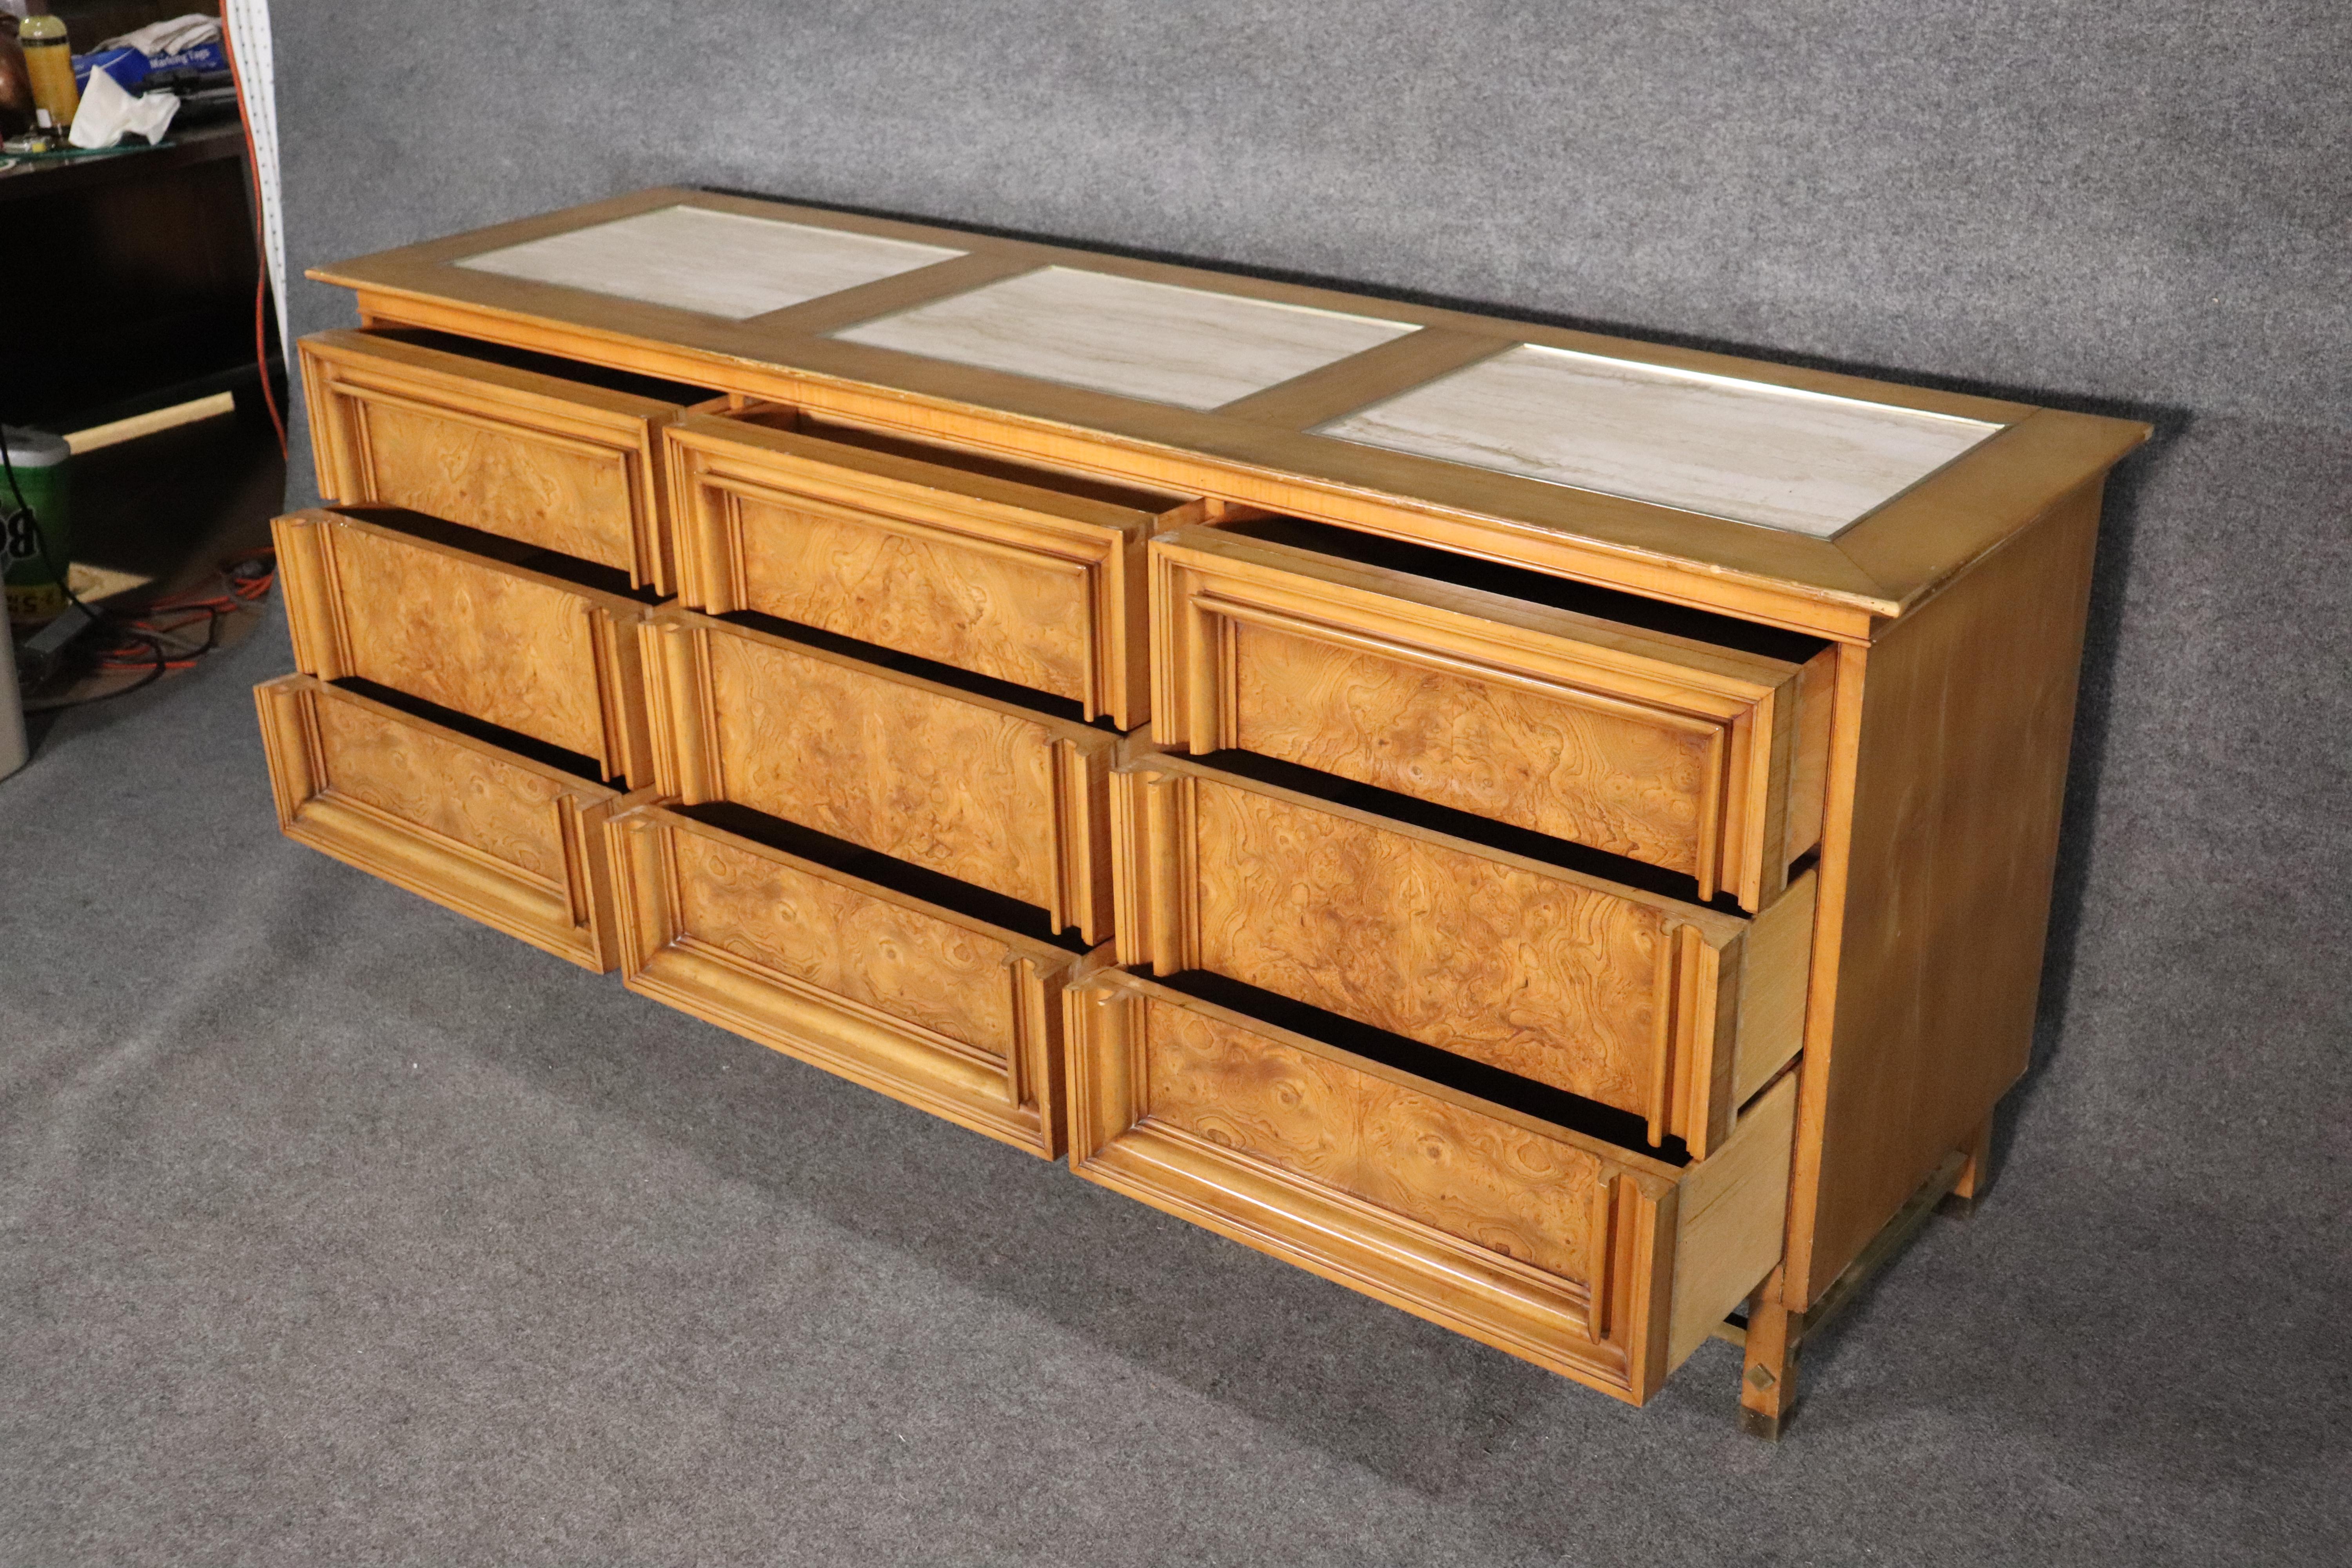 Stunning midcentury dresser made by JL Metz Company. Featuring weathered cherry wood with accenting burl front drawers, inset travertine top and patina brass stretchers.
Please confirm location NY or NJ.